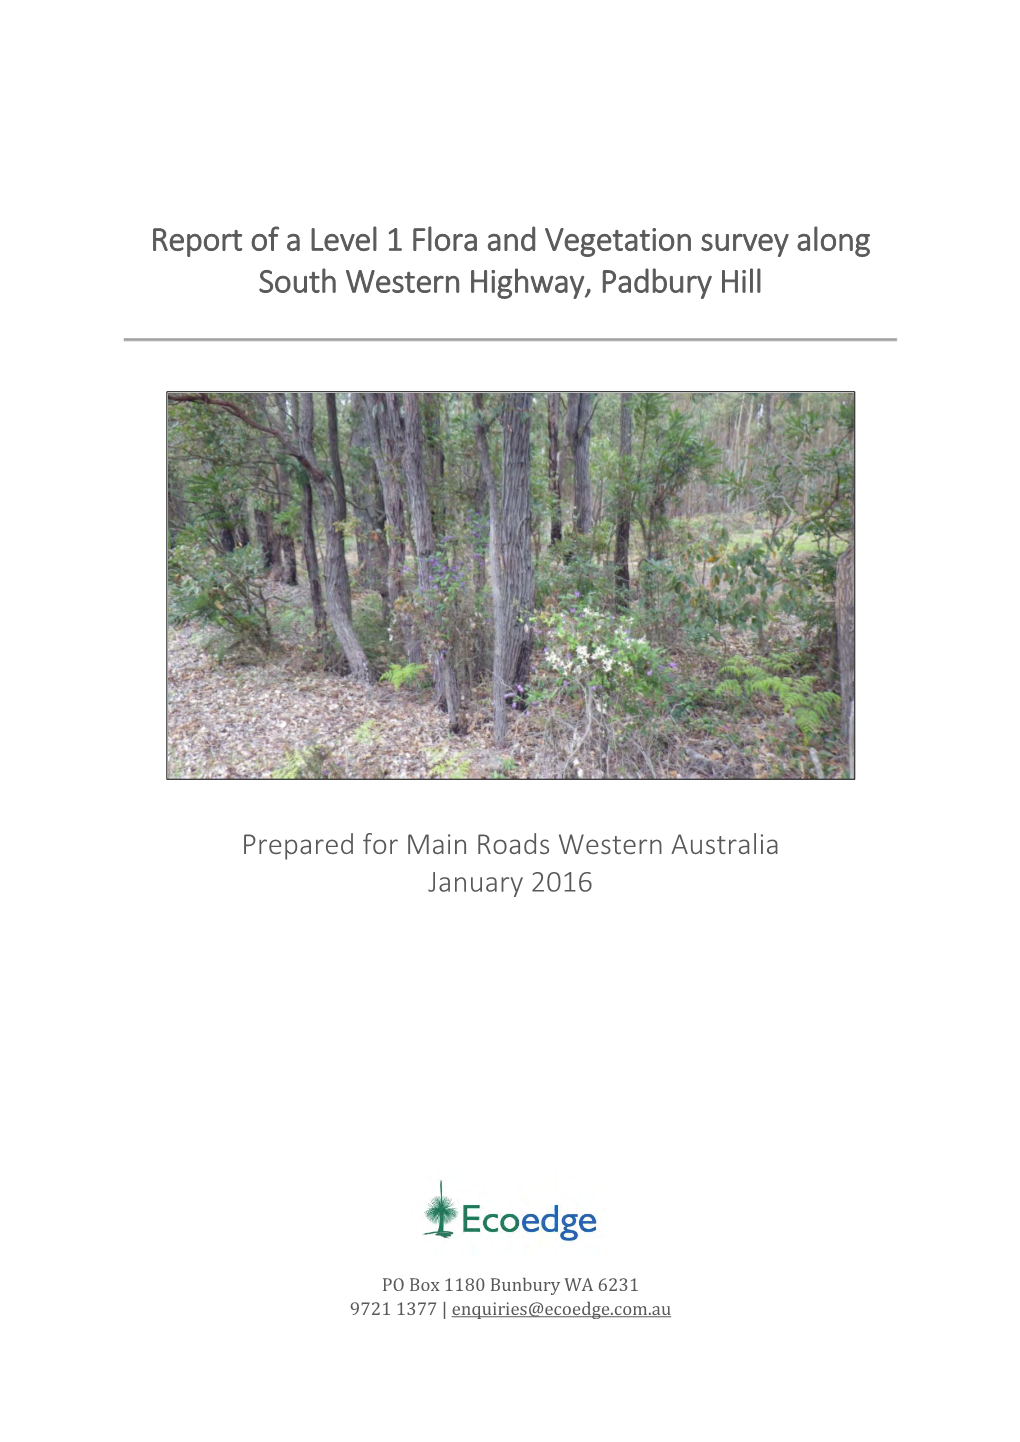 Report of a Level 1 Flora and Vegetation Survey Along South Western Highway, Padbury Hill